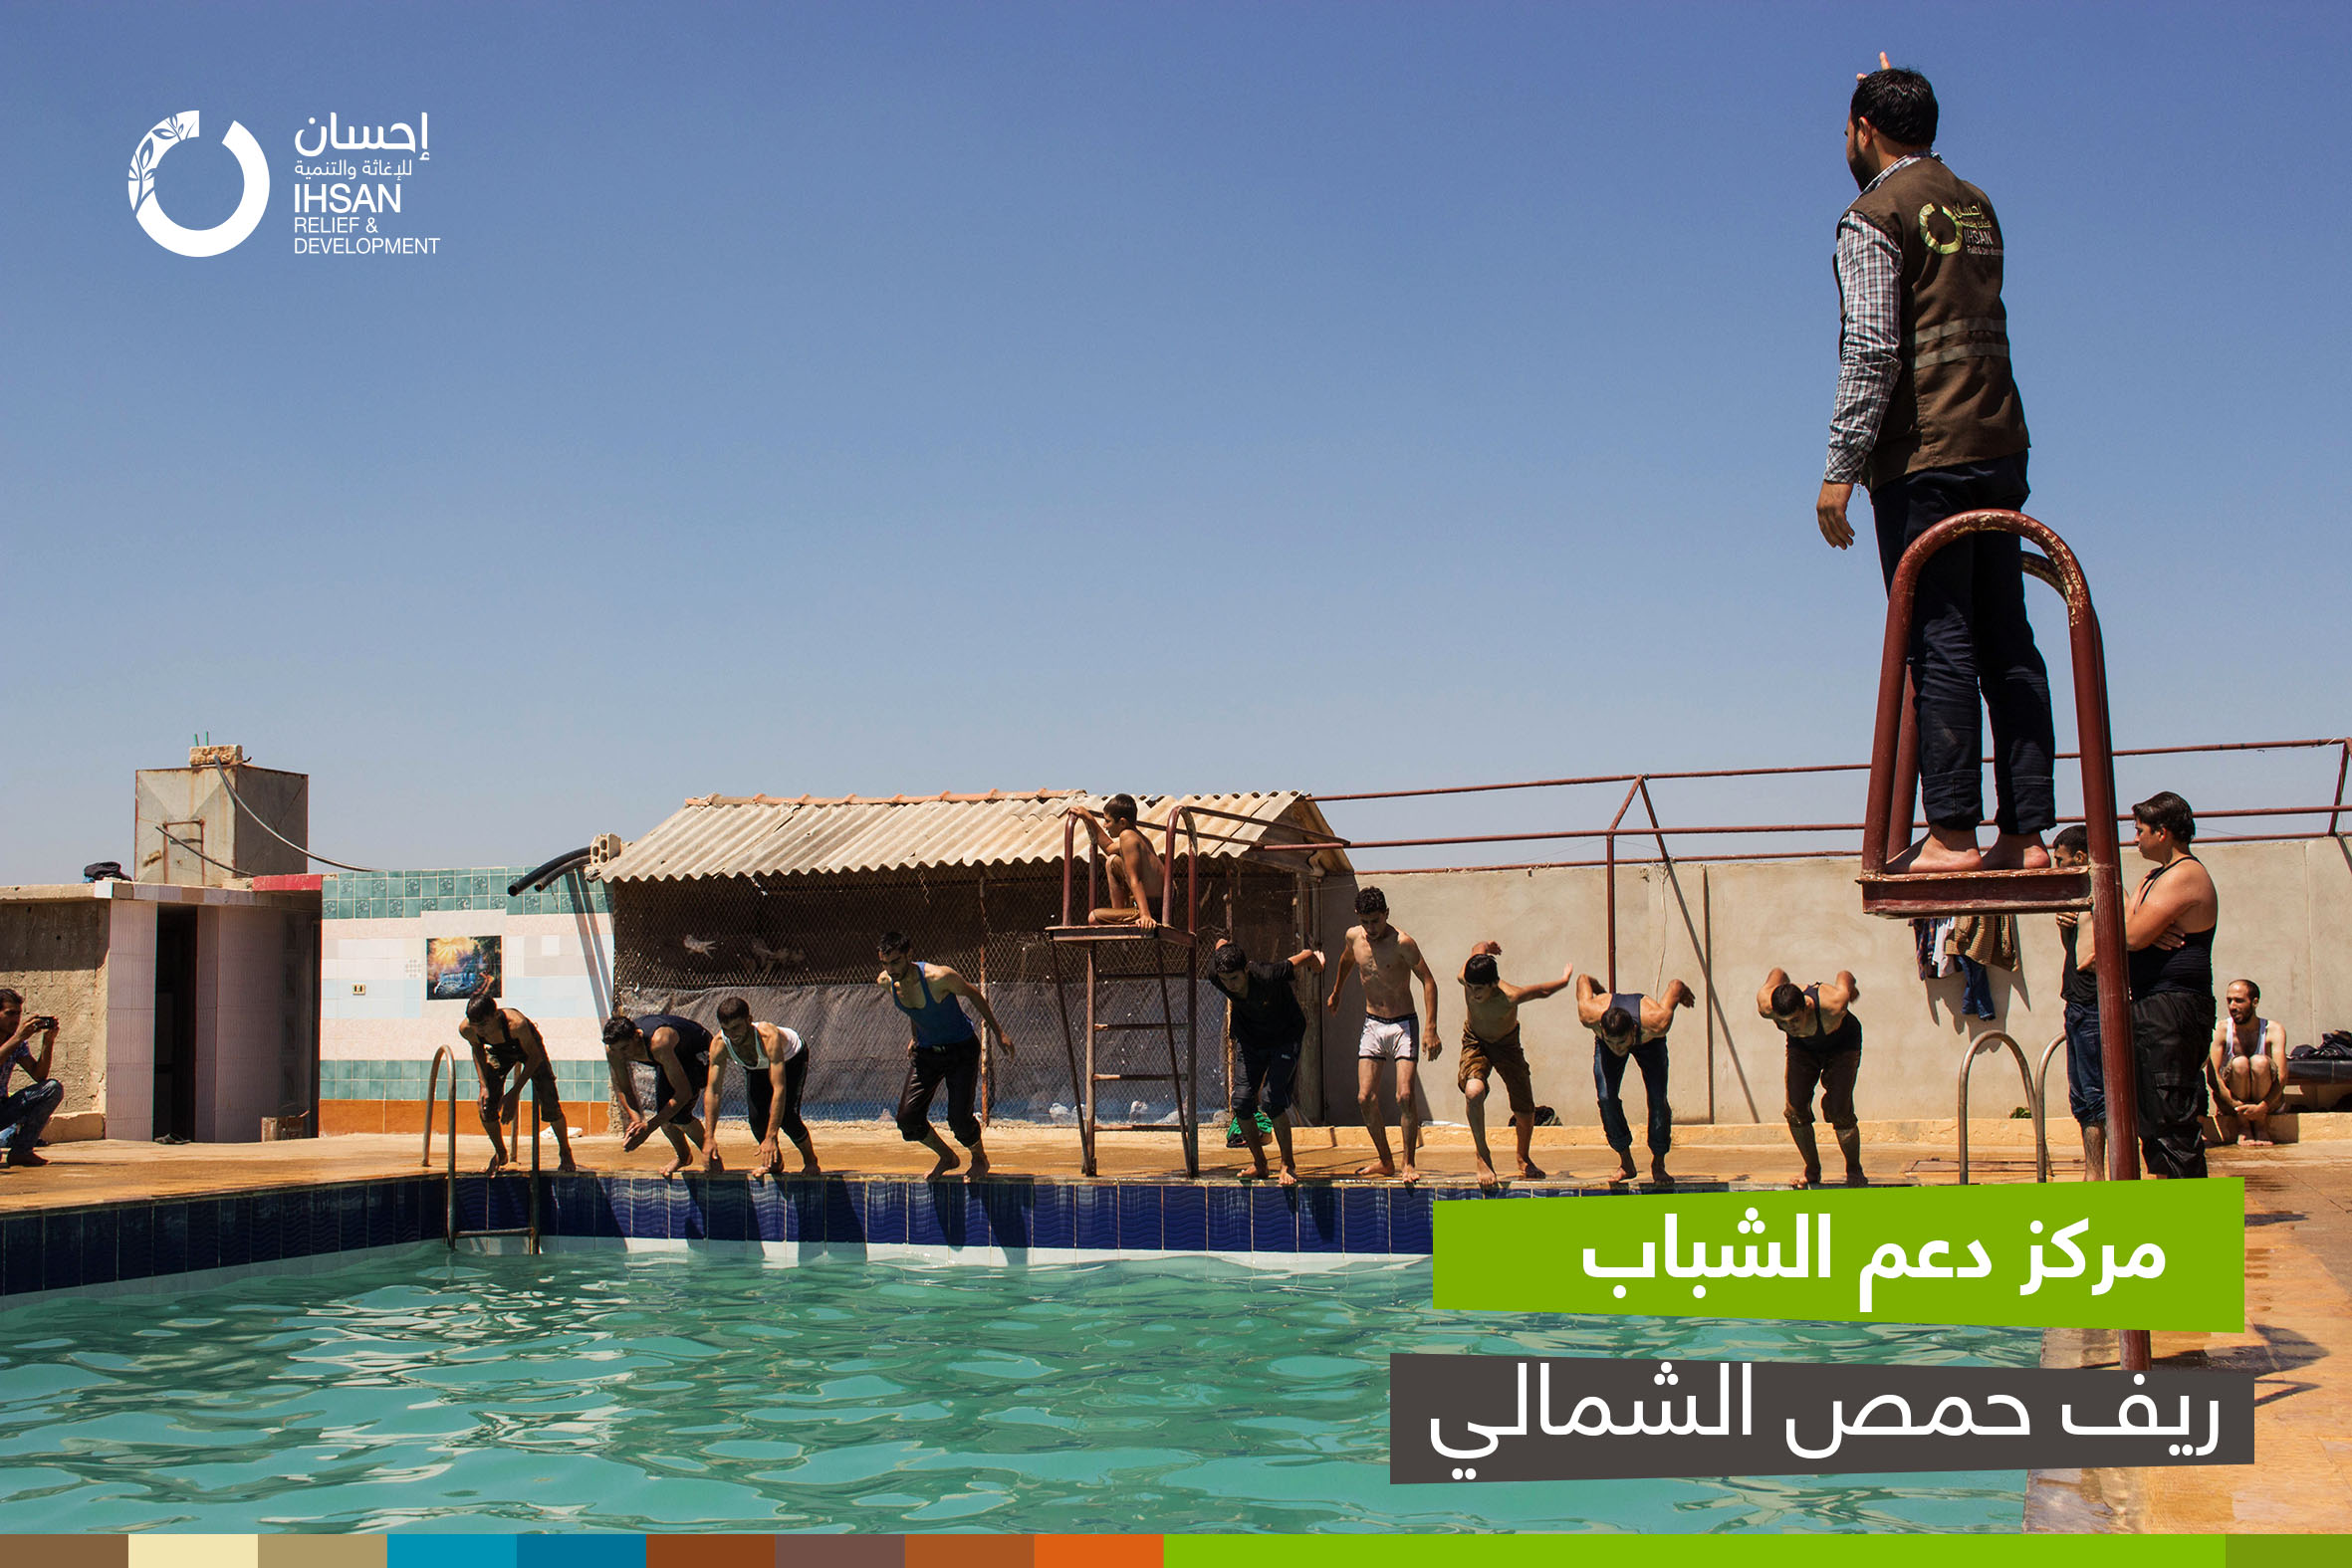 Recreational activities for young people at Ihsan Youth Support  Center in the Northern countryside of Homs